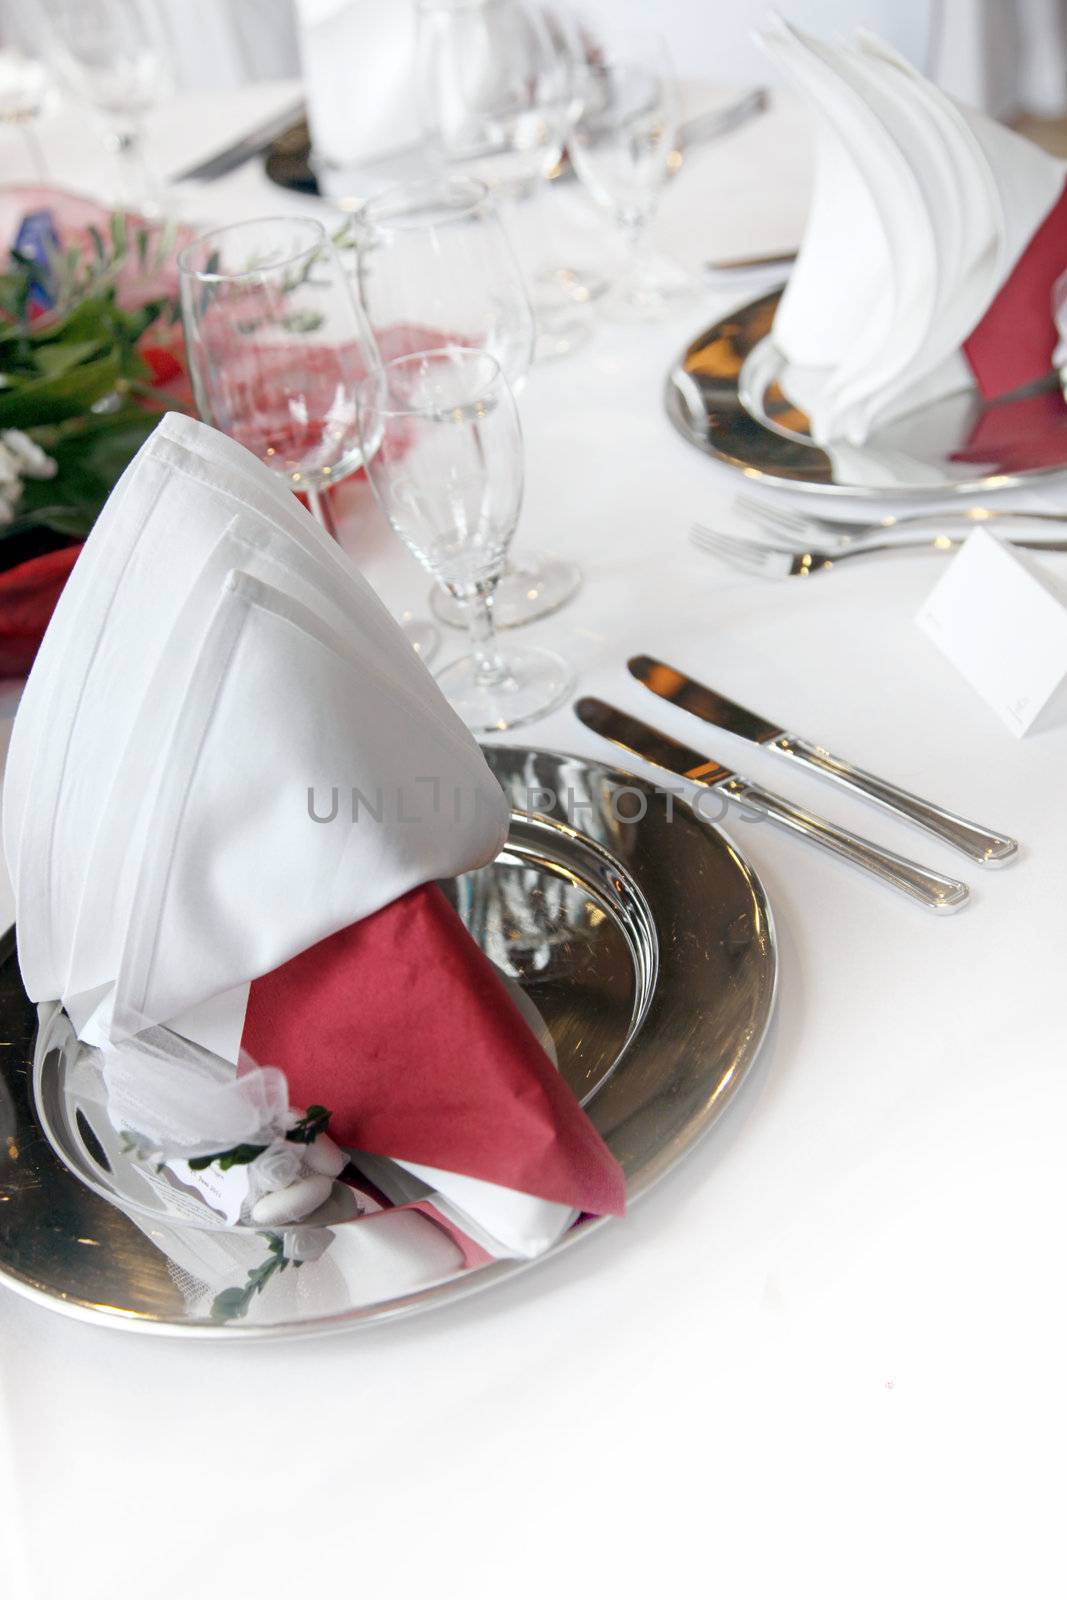 Formal, elegant table decoration in red  by Farina6000